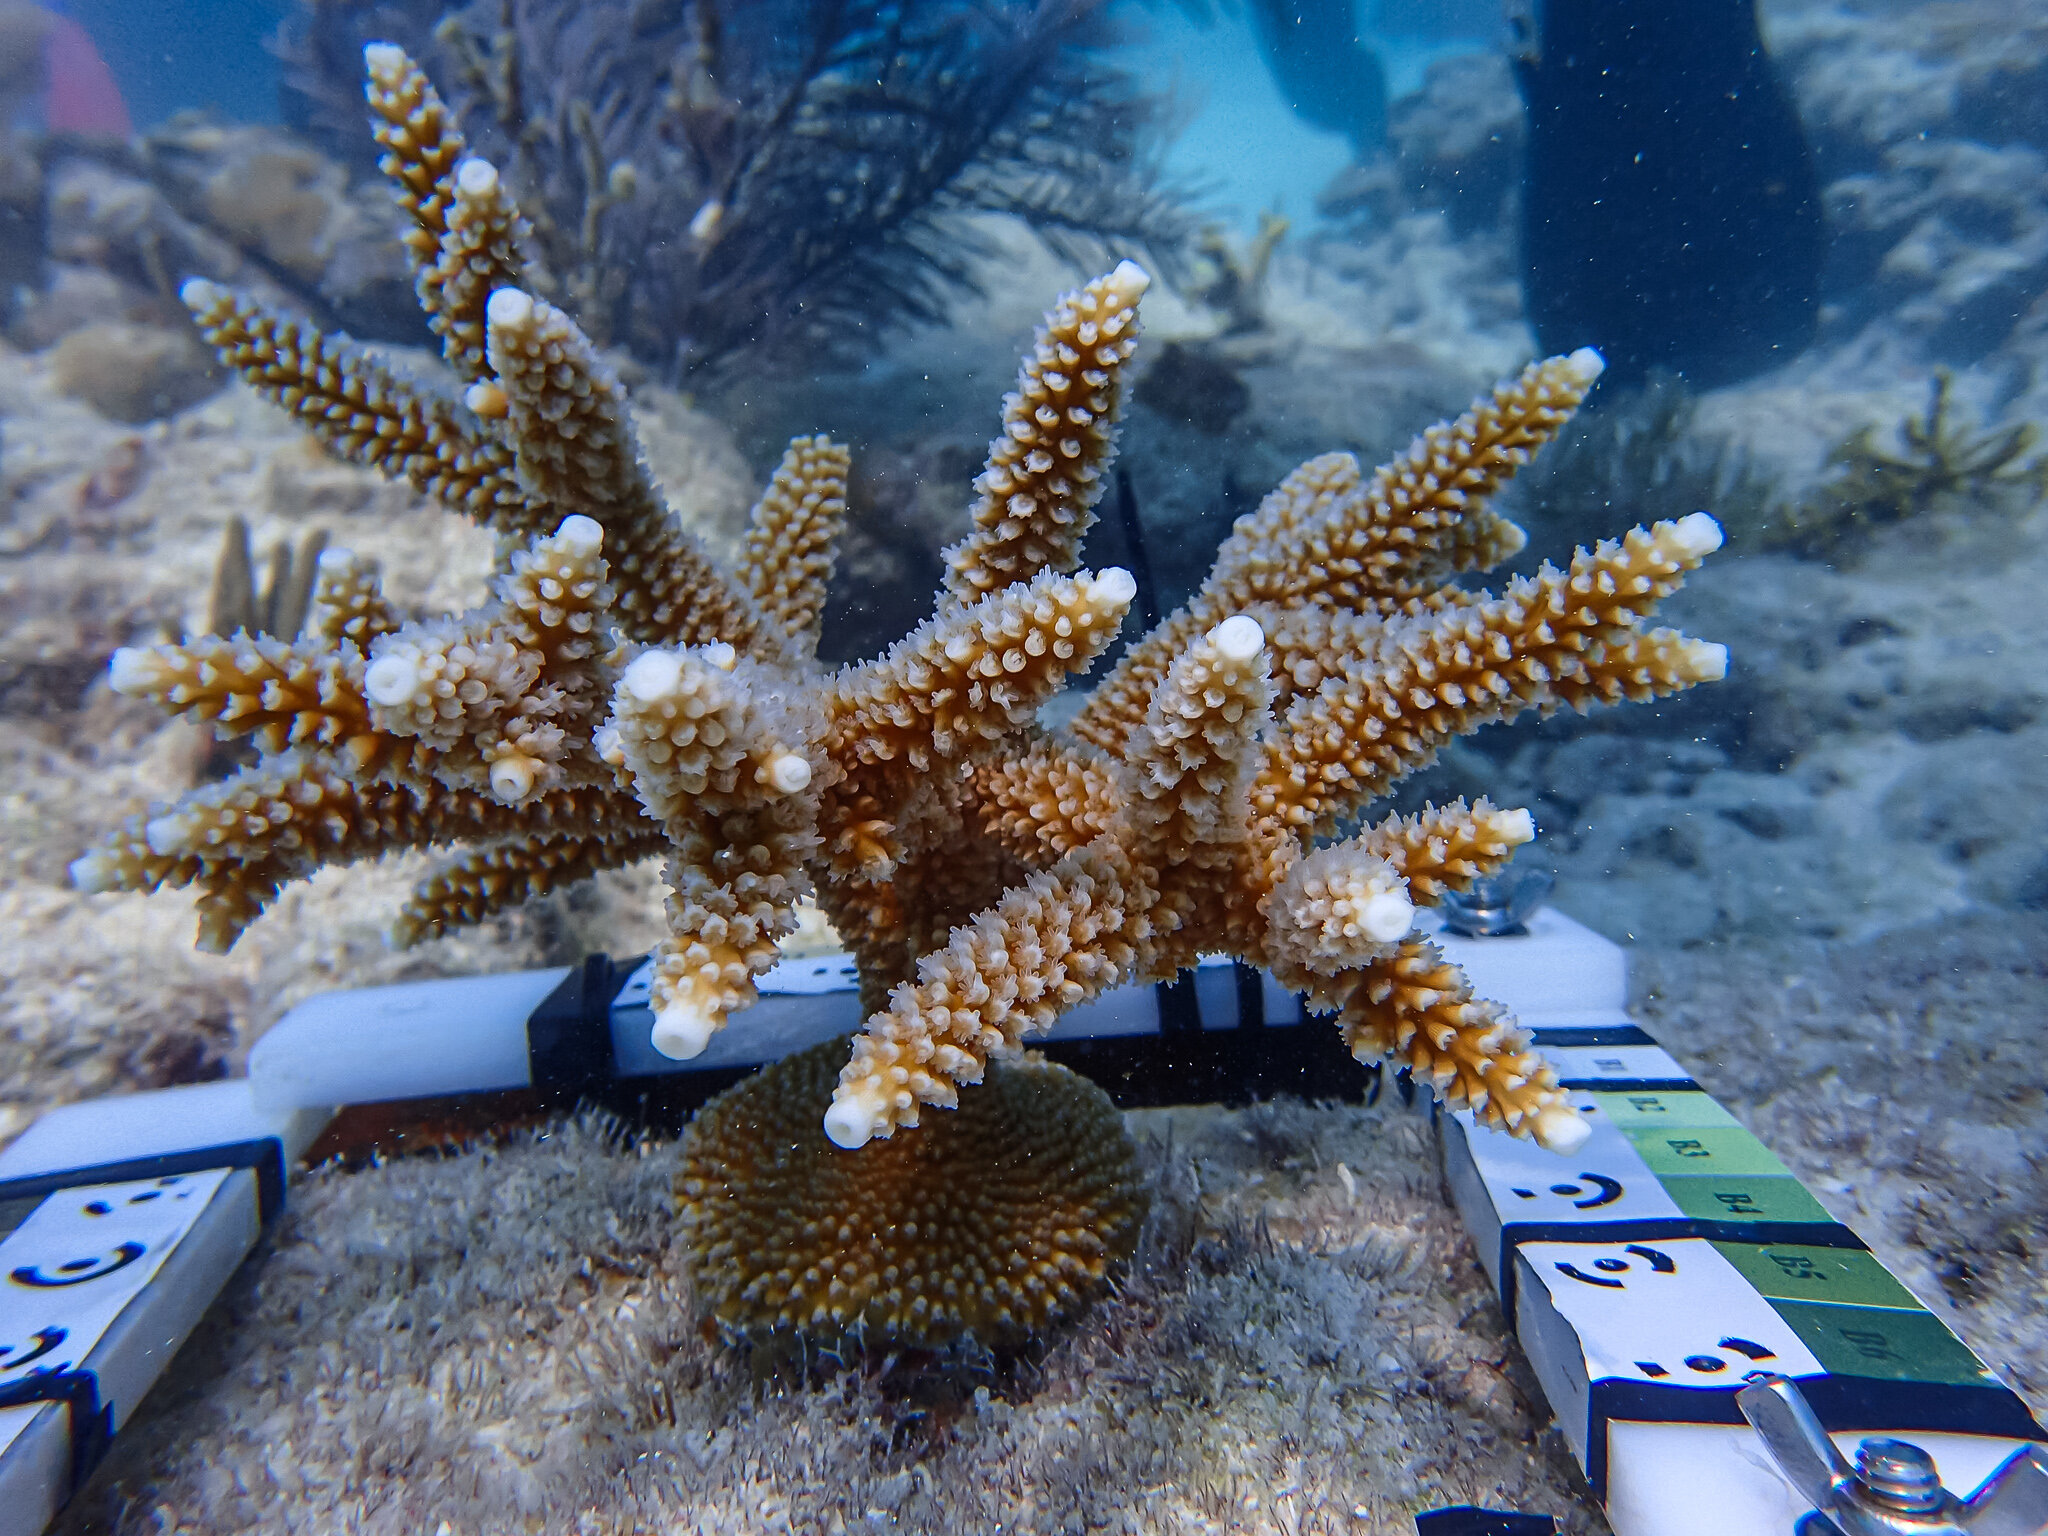 What do good investing and saving the world's dying coral reefs have in common? ..